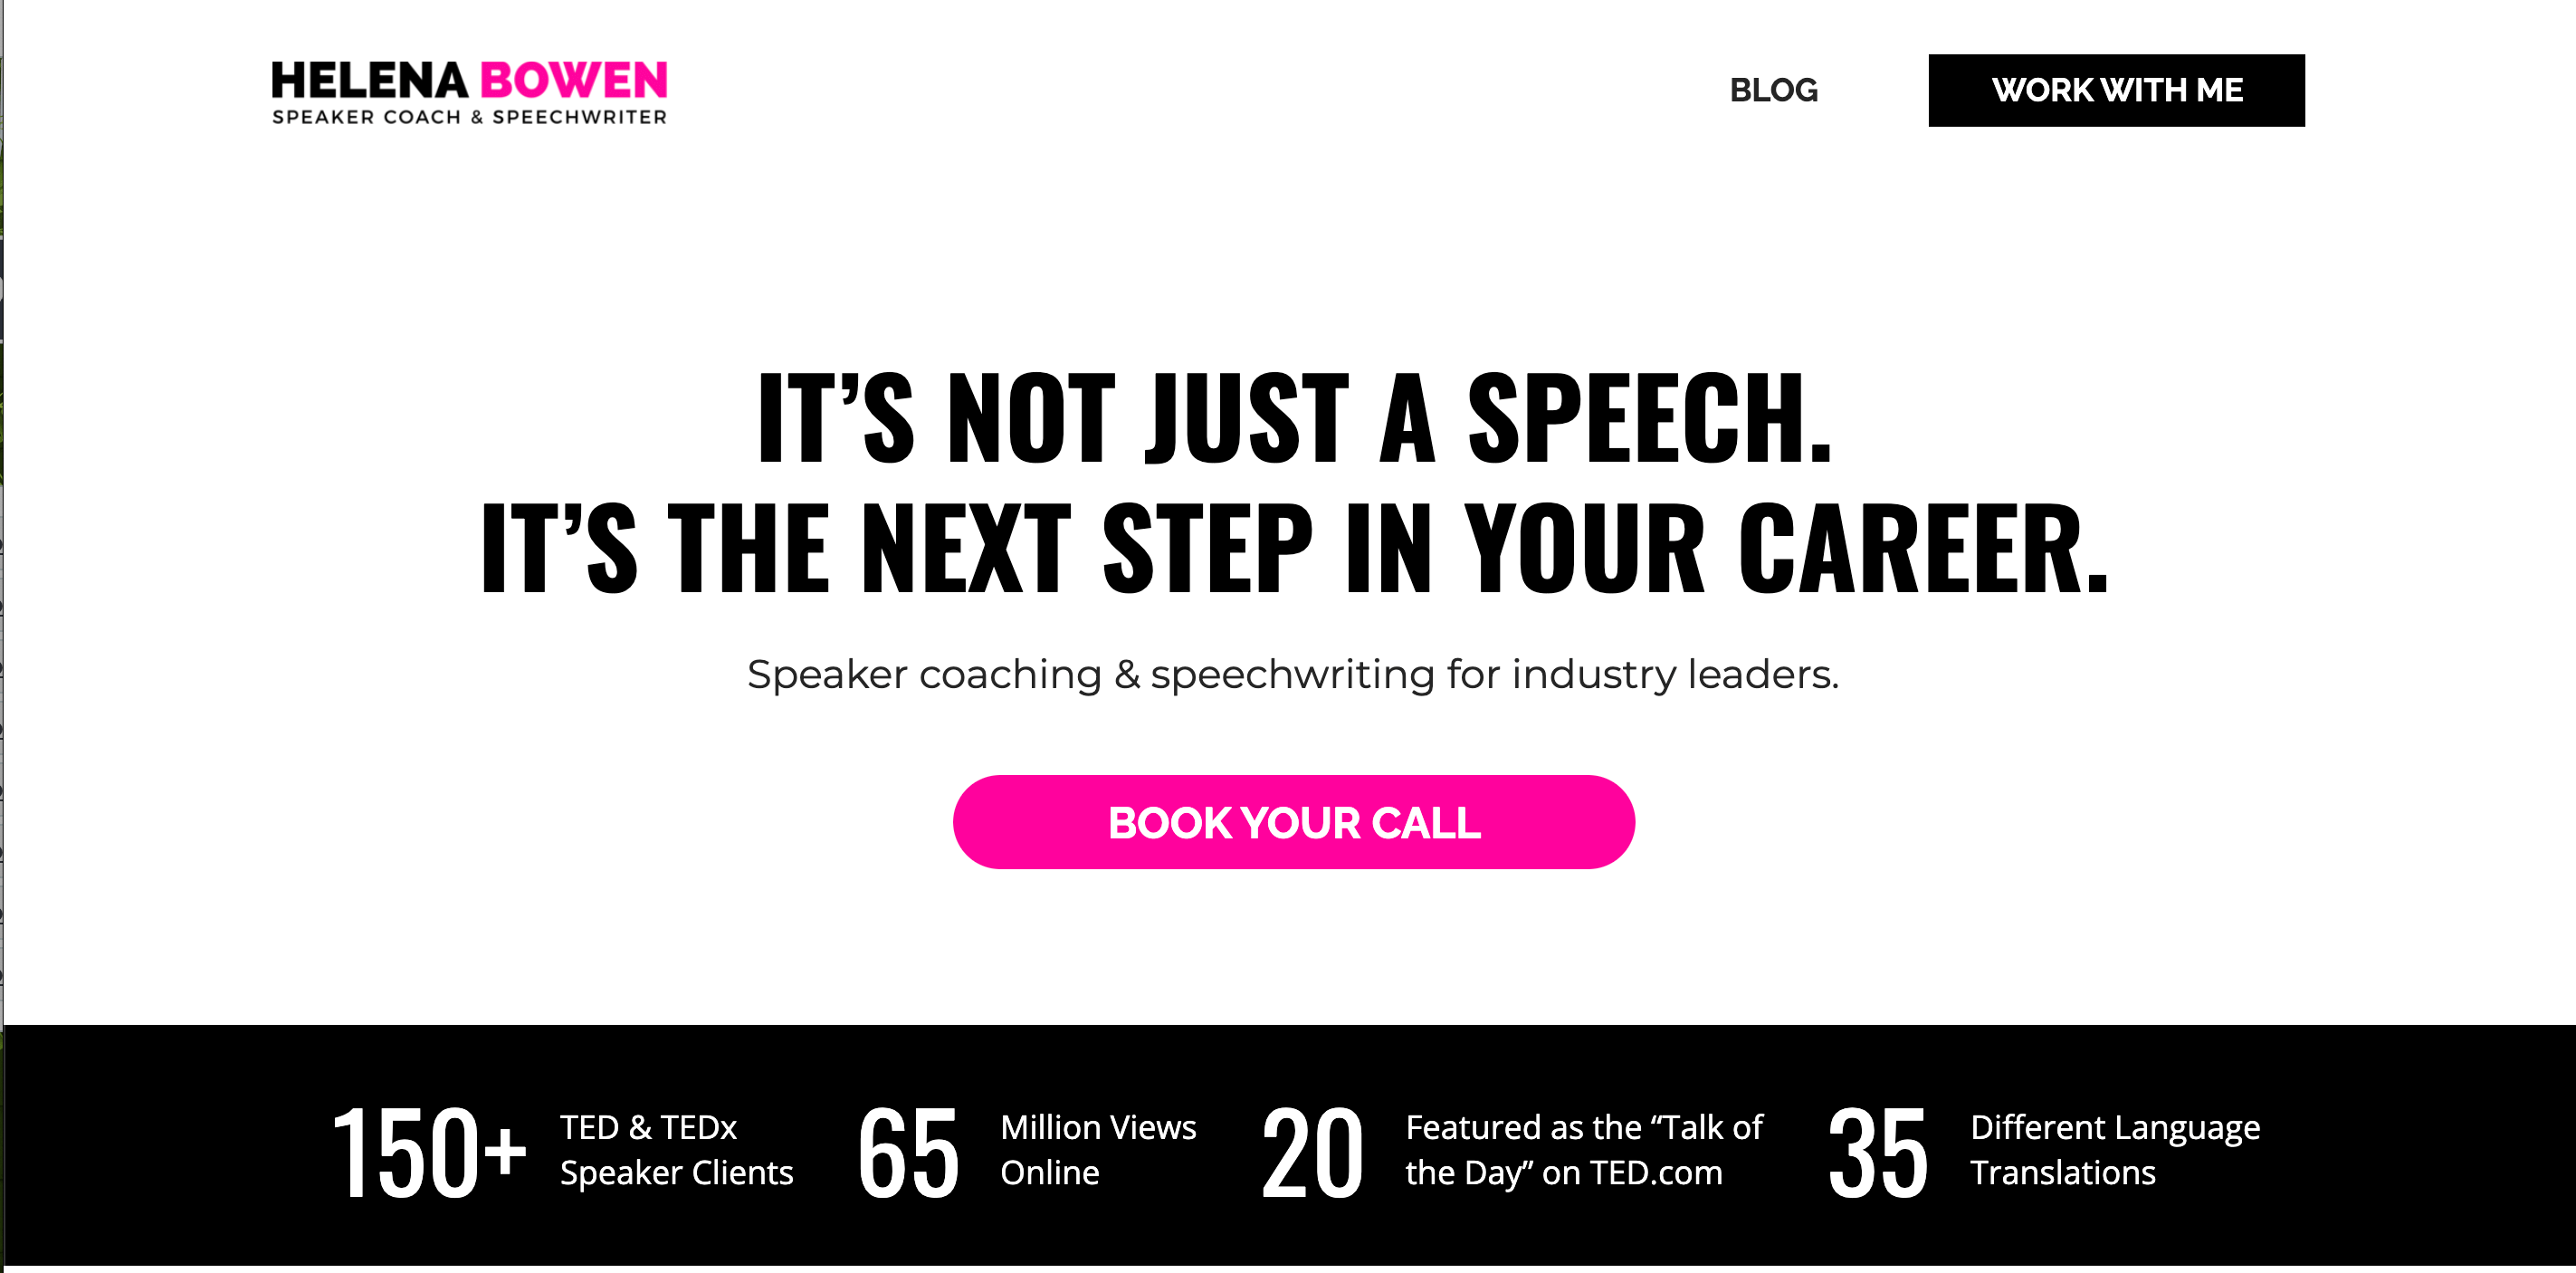 The homepage for Helena Bowen, speaker coach and speechwriter. Design is minimal. Text reads "It's not just a speech. It's the next step in your career" above a pink "book your call" button. The bottom banner highlights stats about her clients. 